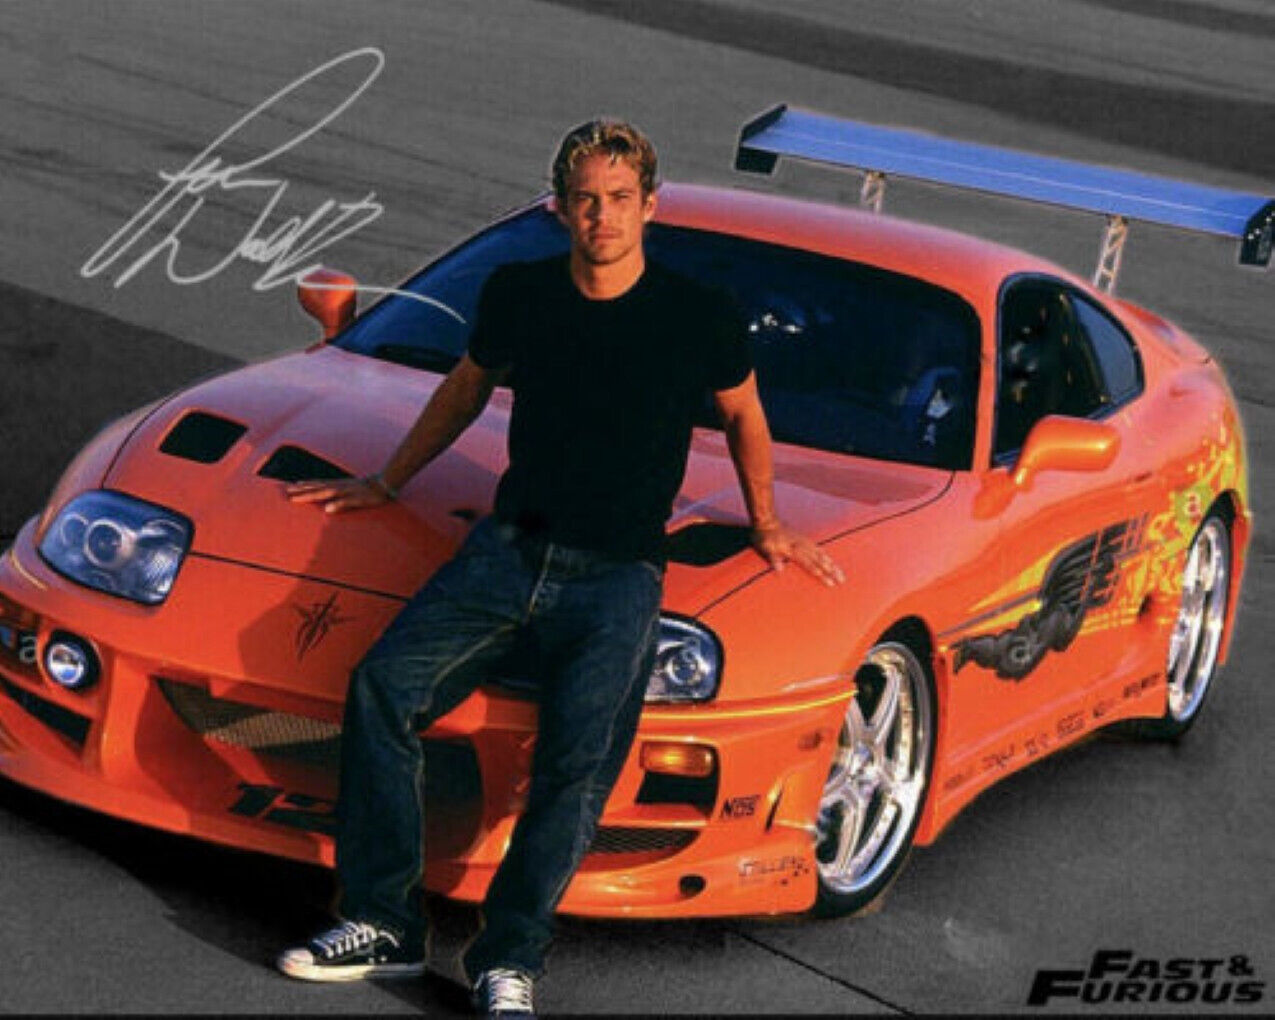 Paul Walker Fast and Furious signed 8.5x11 Signed Photo Reprint